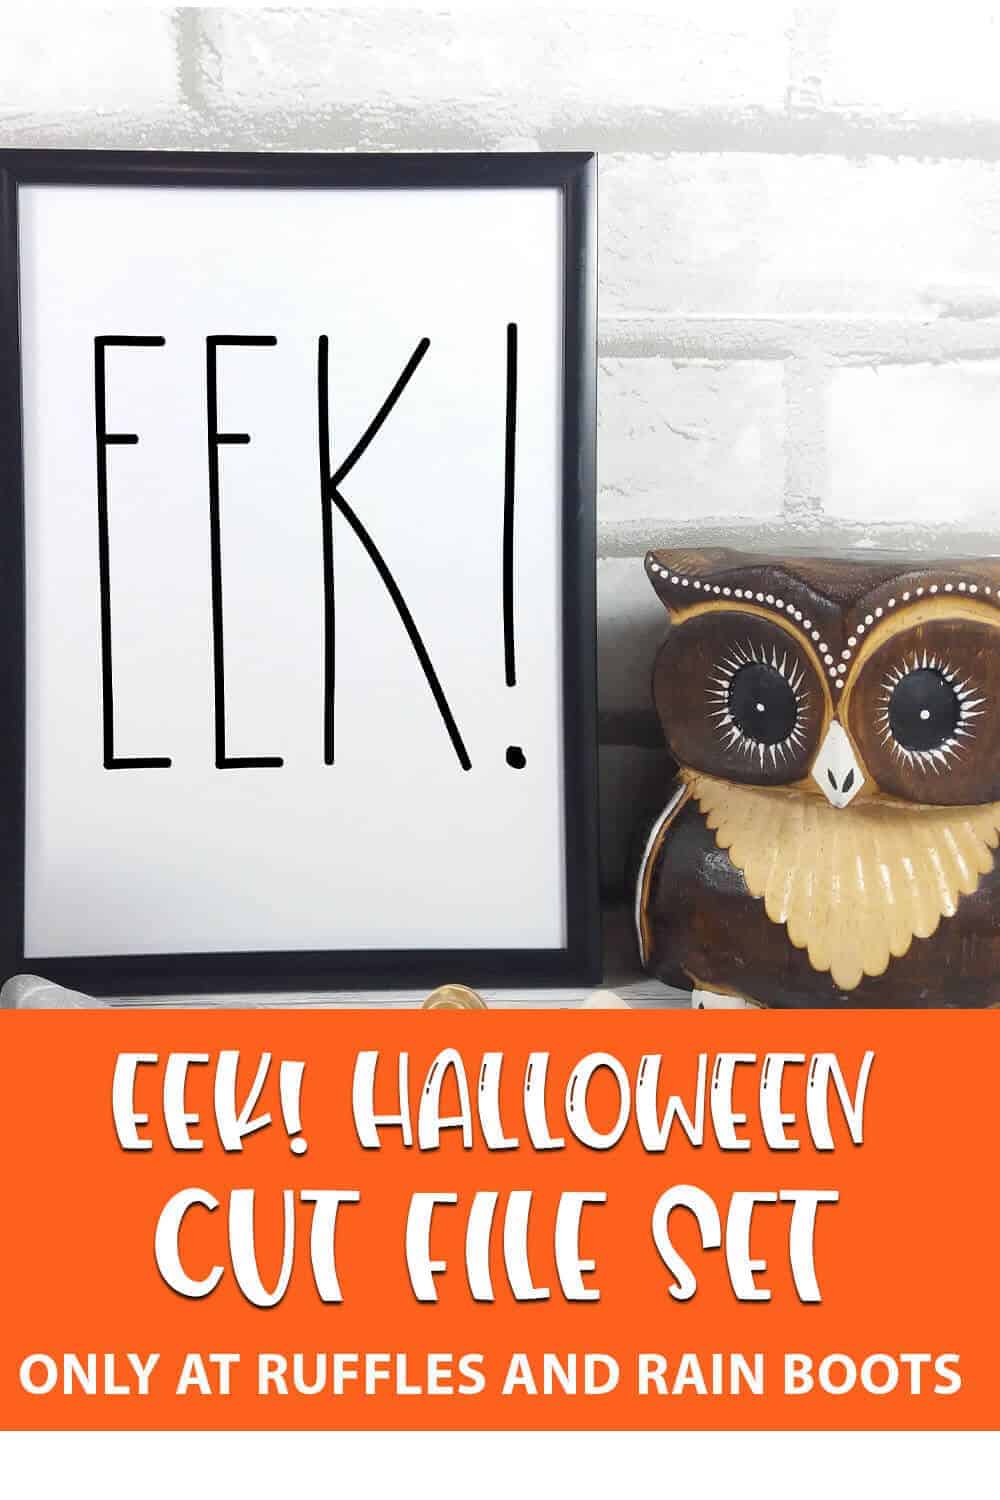 wall art sign using halloween EEK! cut file set for cricut or silhouette with text which reads EEK halloween cut file set